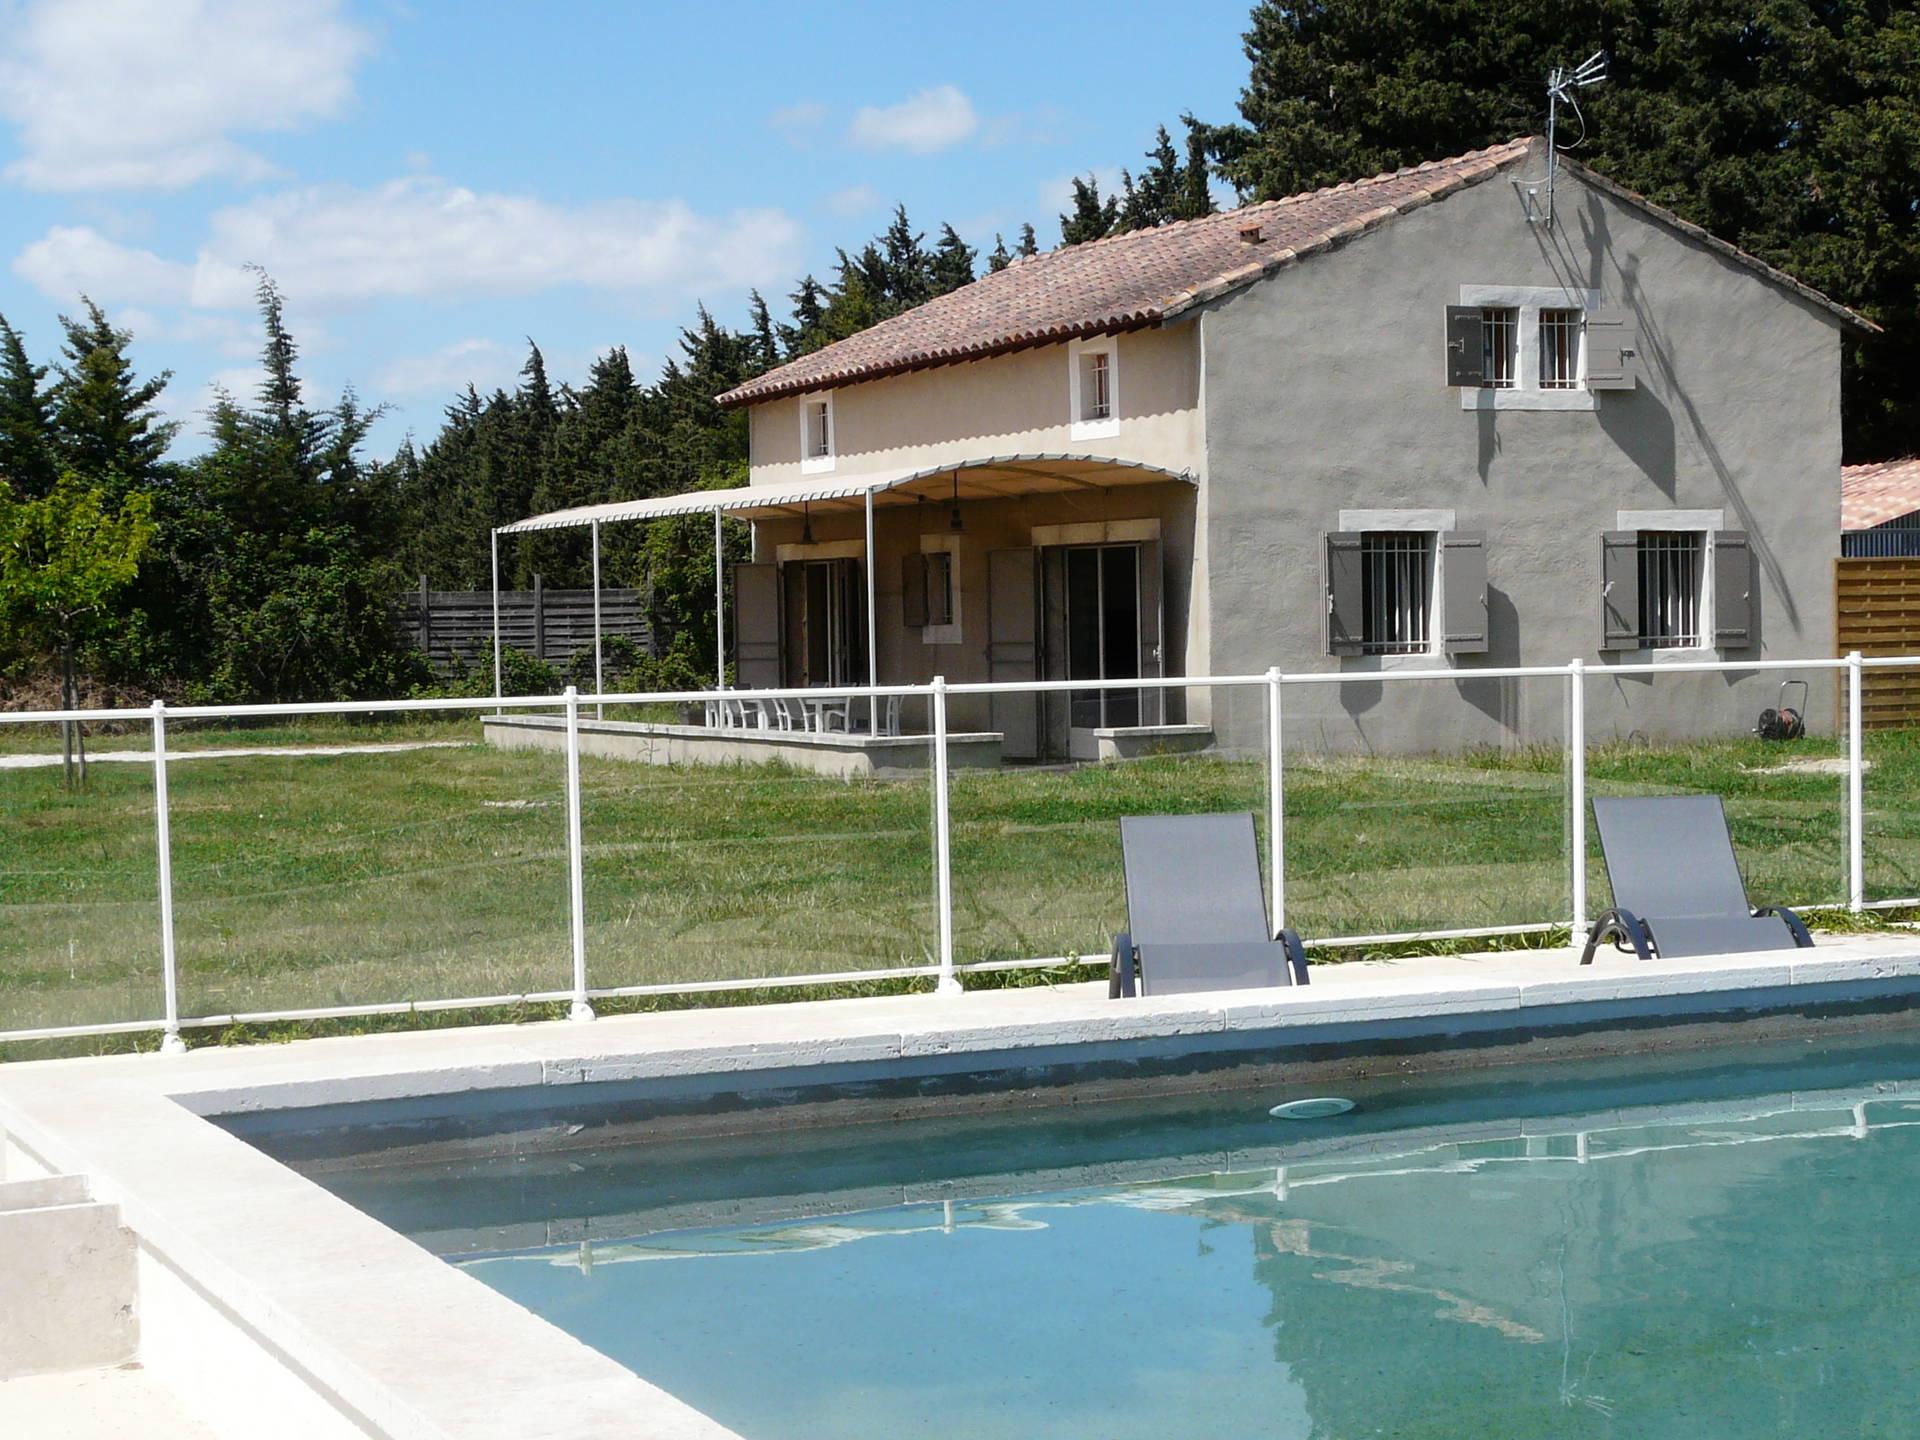 Air-conditioned family house with fenced pool in Fontvieille in the Alpilles, sleeps 8